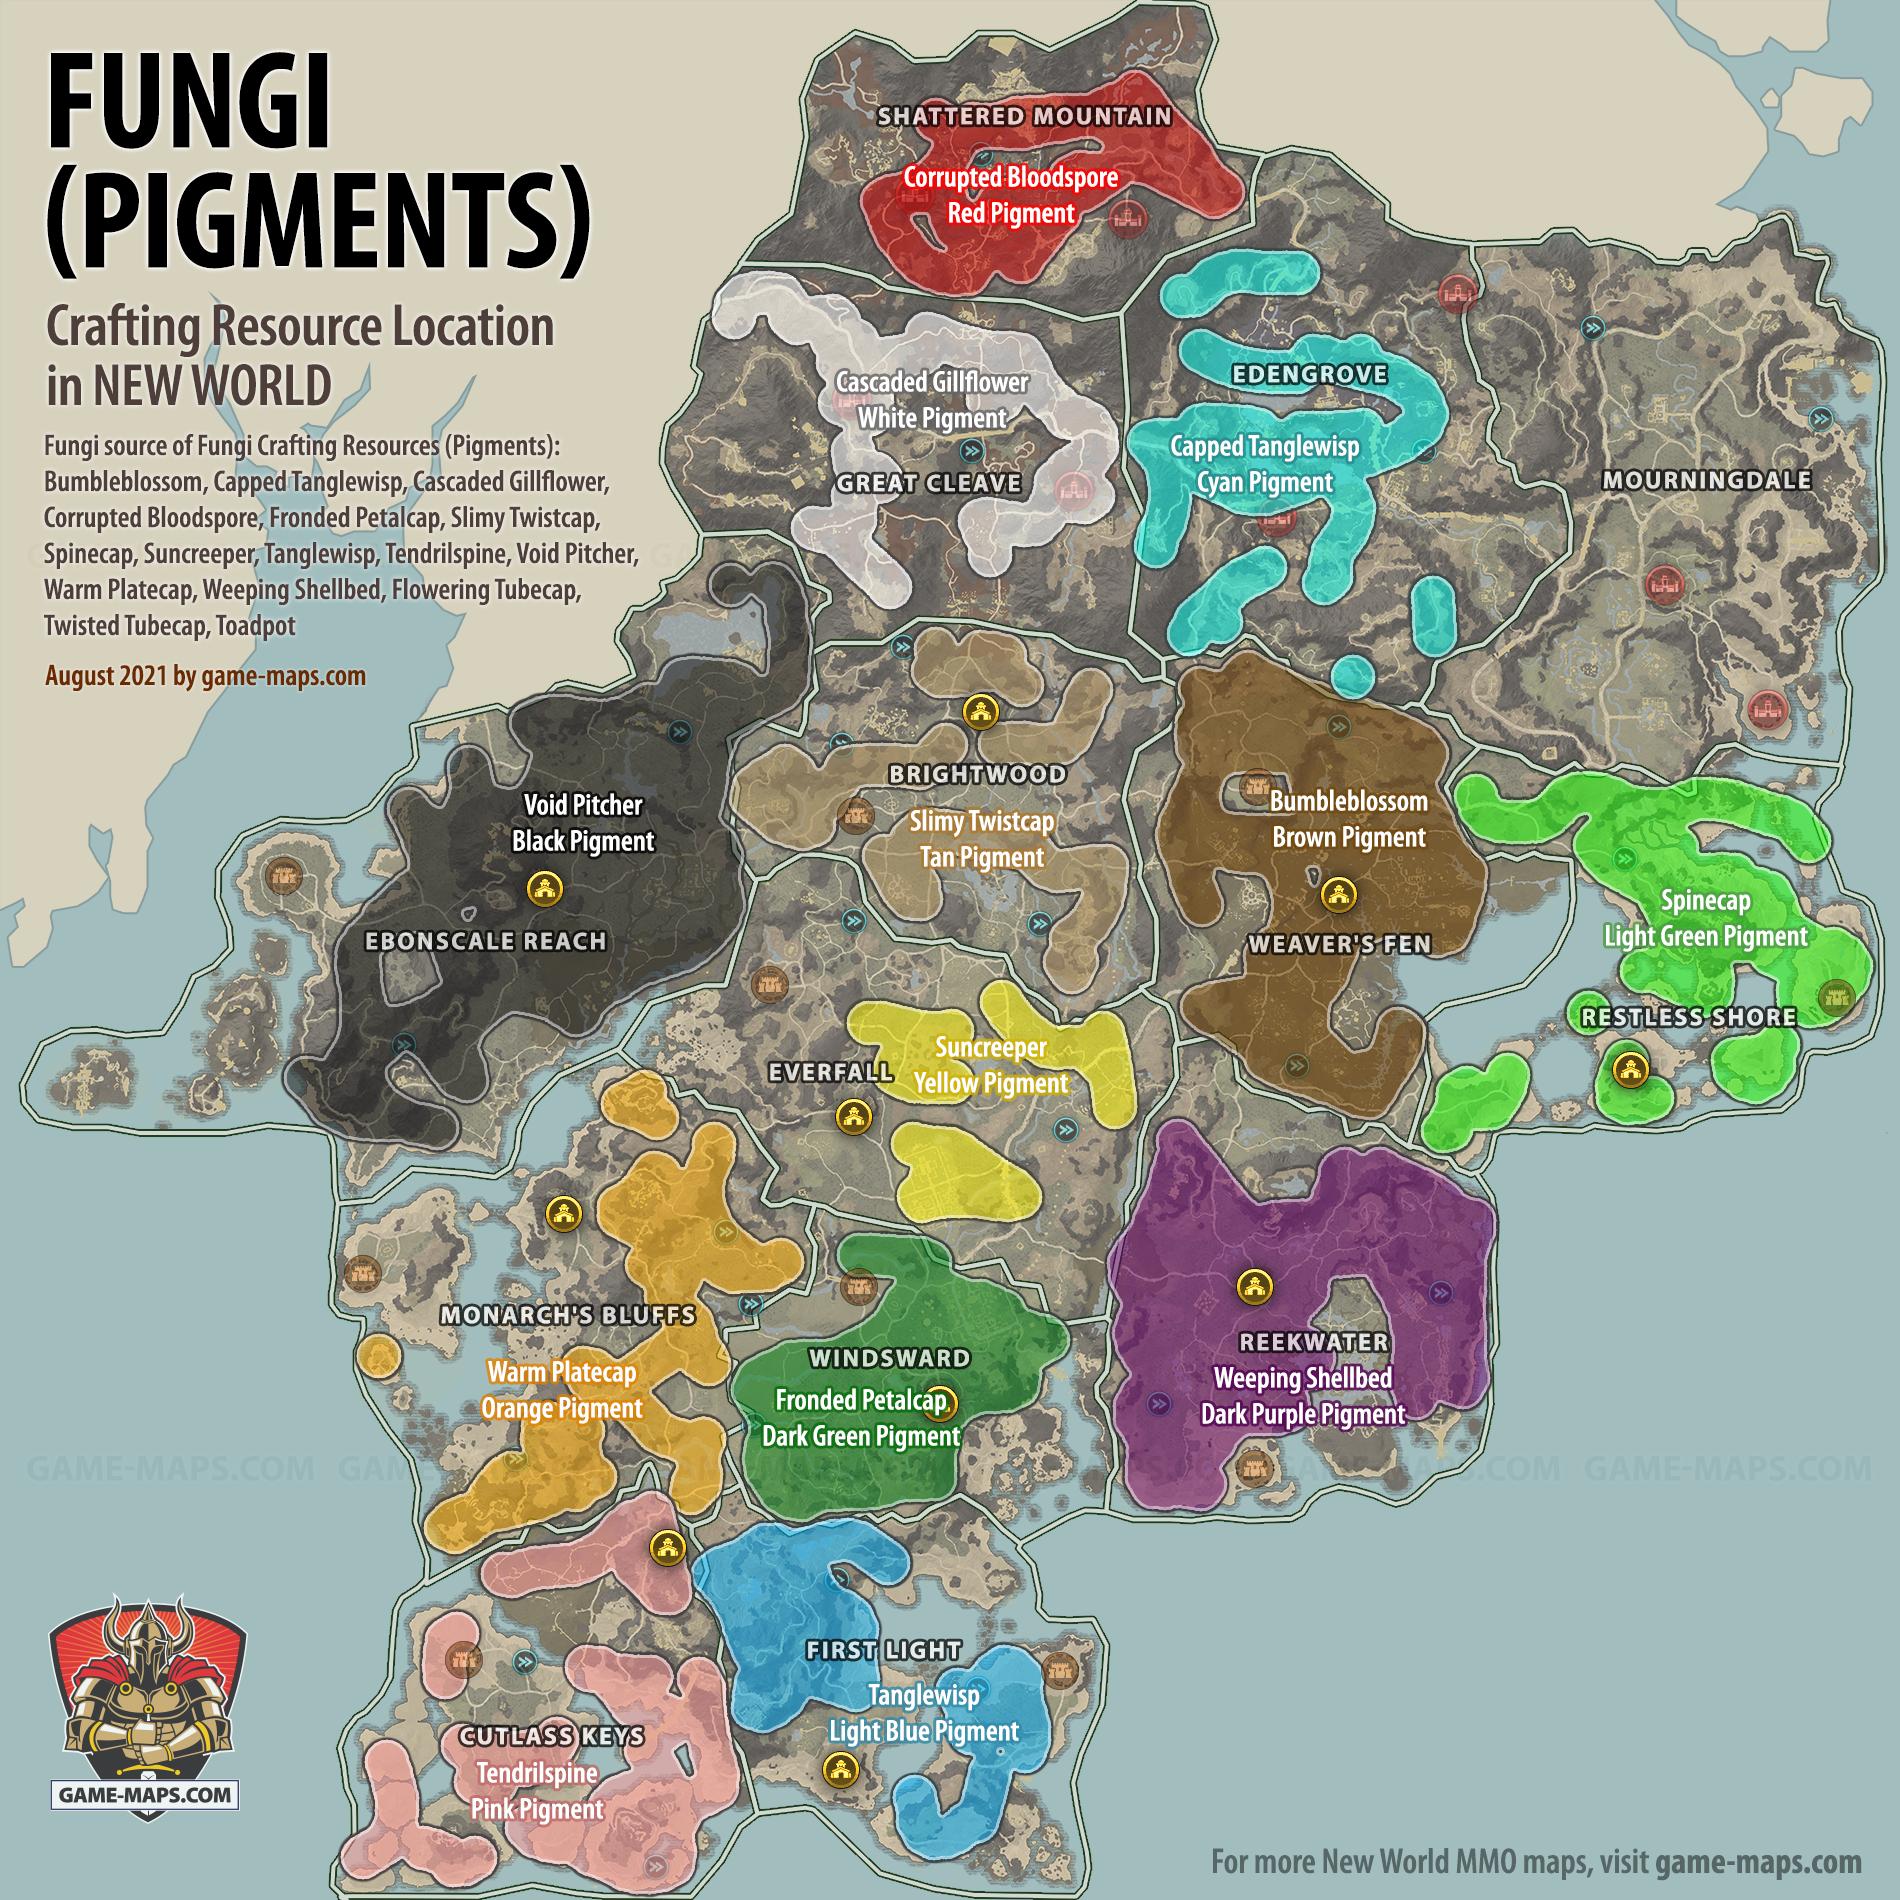 New World Resource Location Map of Fungi (Pigments), source of Fungi Crafting Resources: Bumbleblossom, Capped Tanglewisp, Cascaded Gillflower, Corrupted Bloodspore, Fronded Petalcap, Slimy Twistcap, Spinecap, Suncreeper, Tanglewisp, Tendrilspine, Void Pitcher, Warm Platecap, Weeping Shellbed, Flowering Tubecap, Twisted Tubecap, Toadpot.